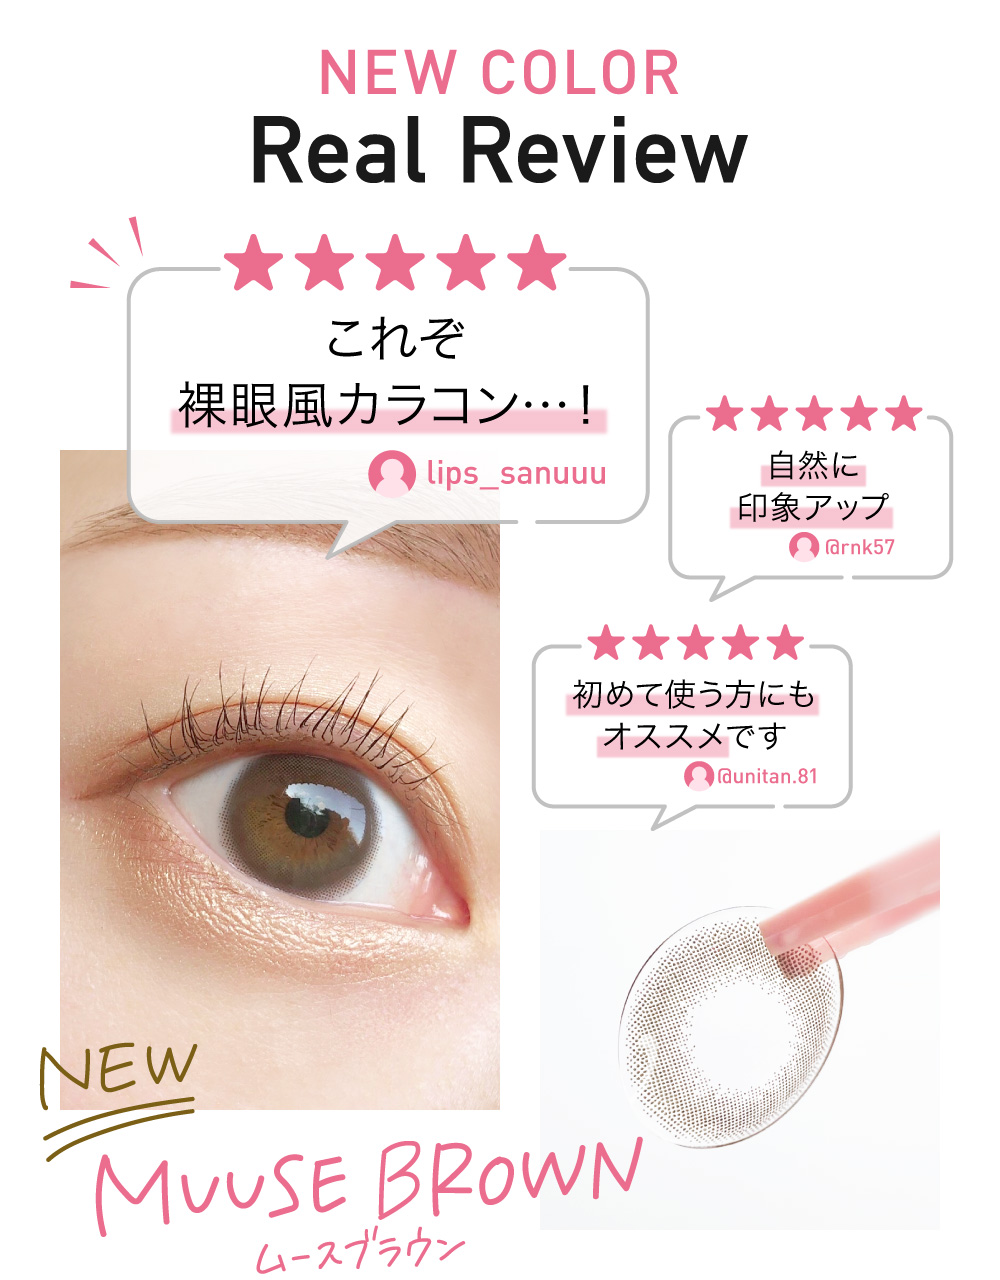 NEW COLOR Real Review MUUSE BROWN ムースブラウン